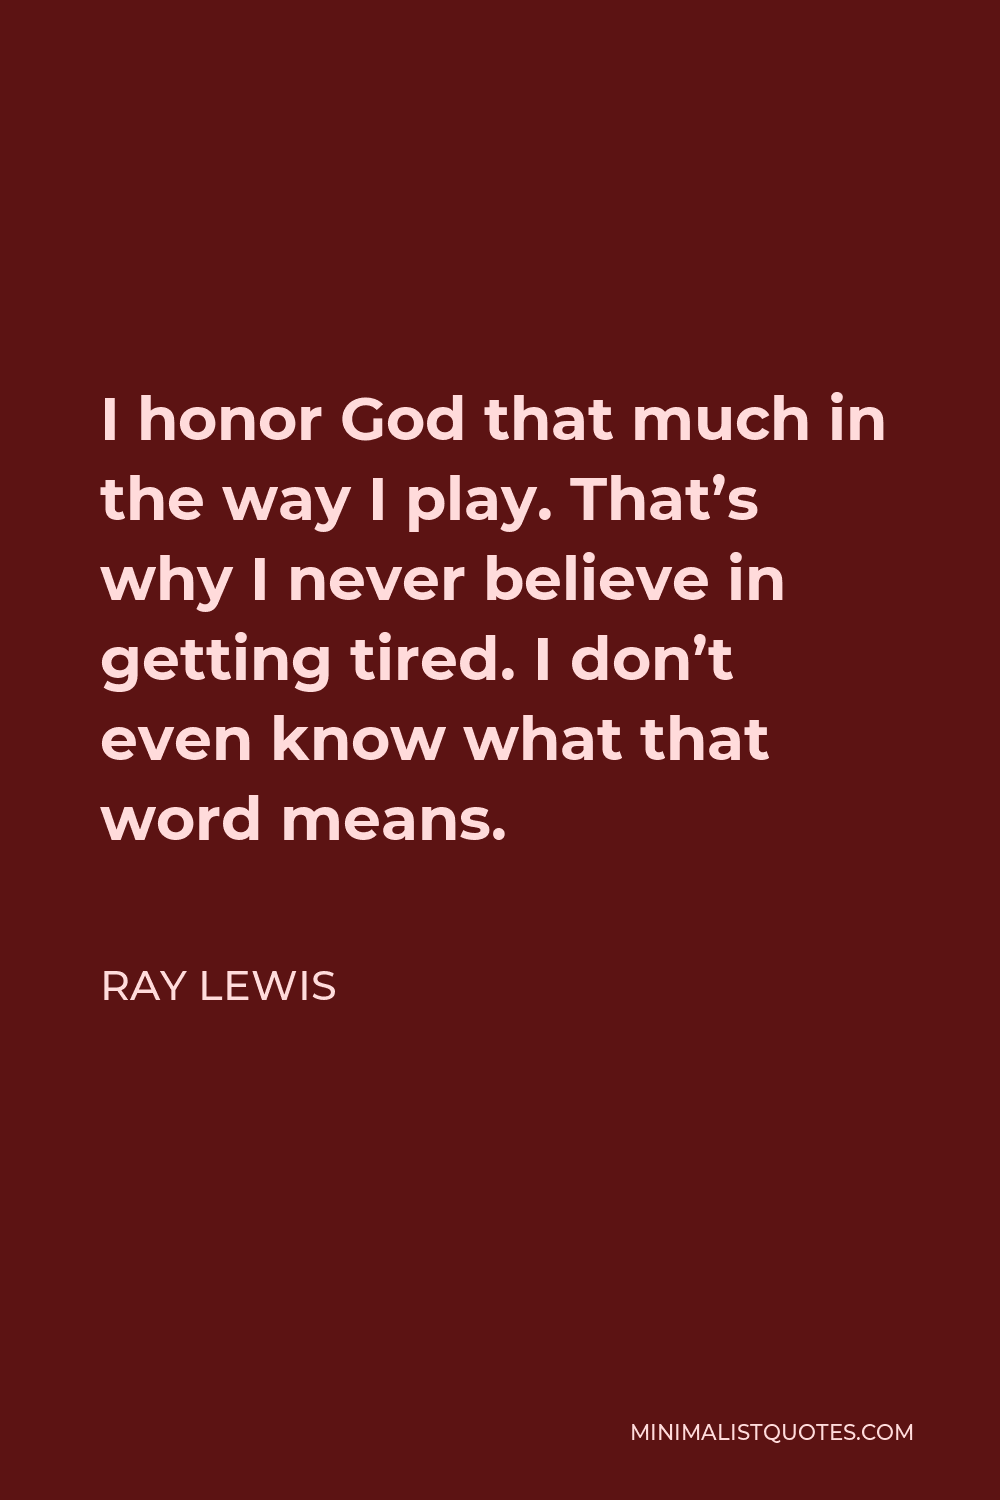 Ray Lewis Quote - I honor God that much in the way I play. That’s why I never believe in getting tired. I don’t even know what that word means.